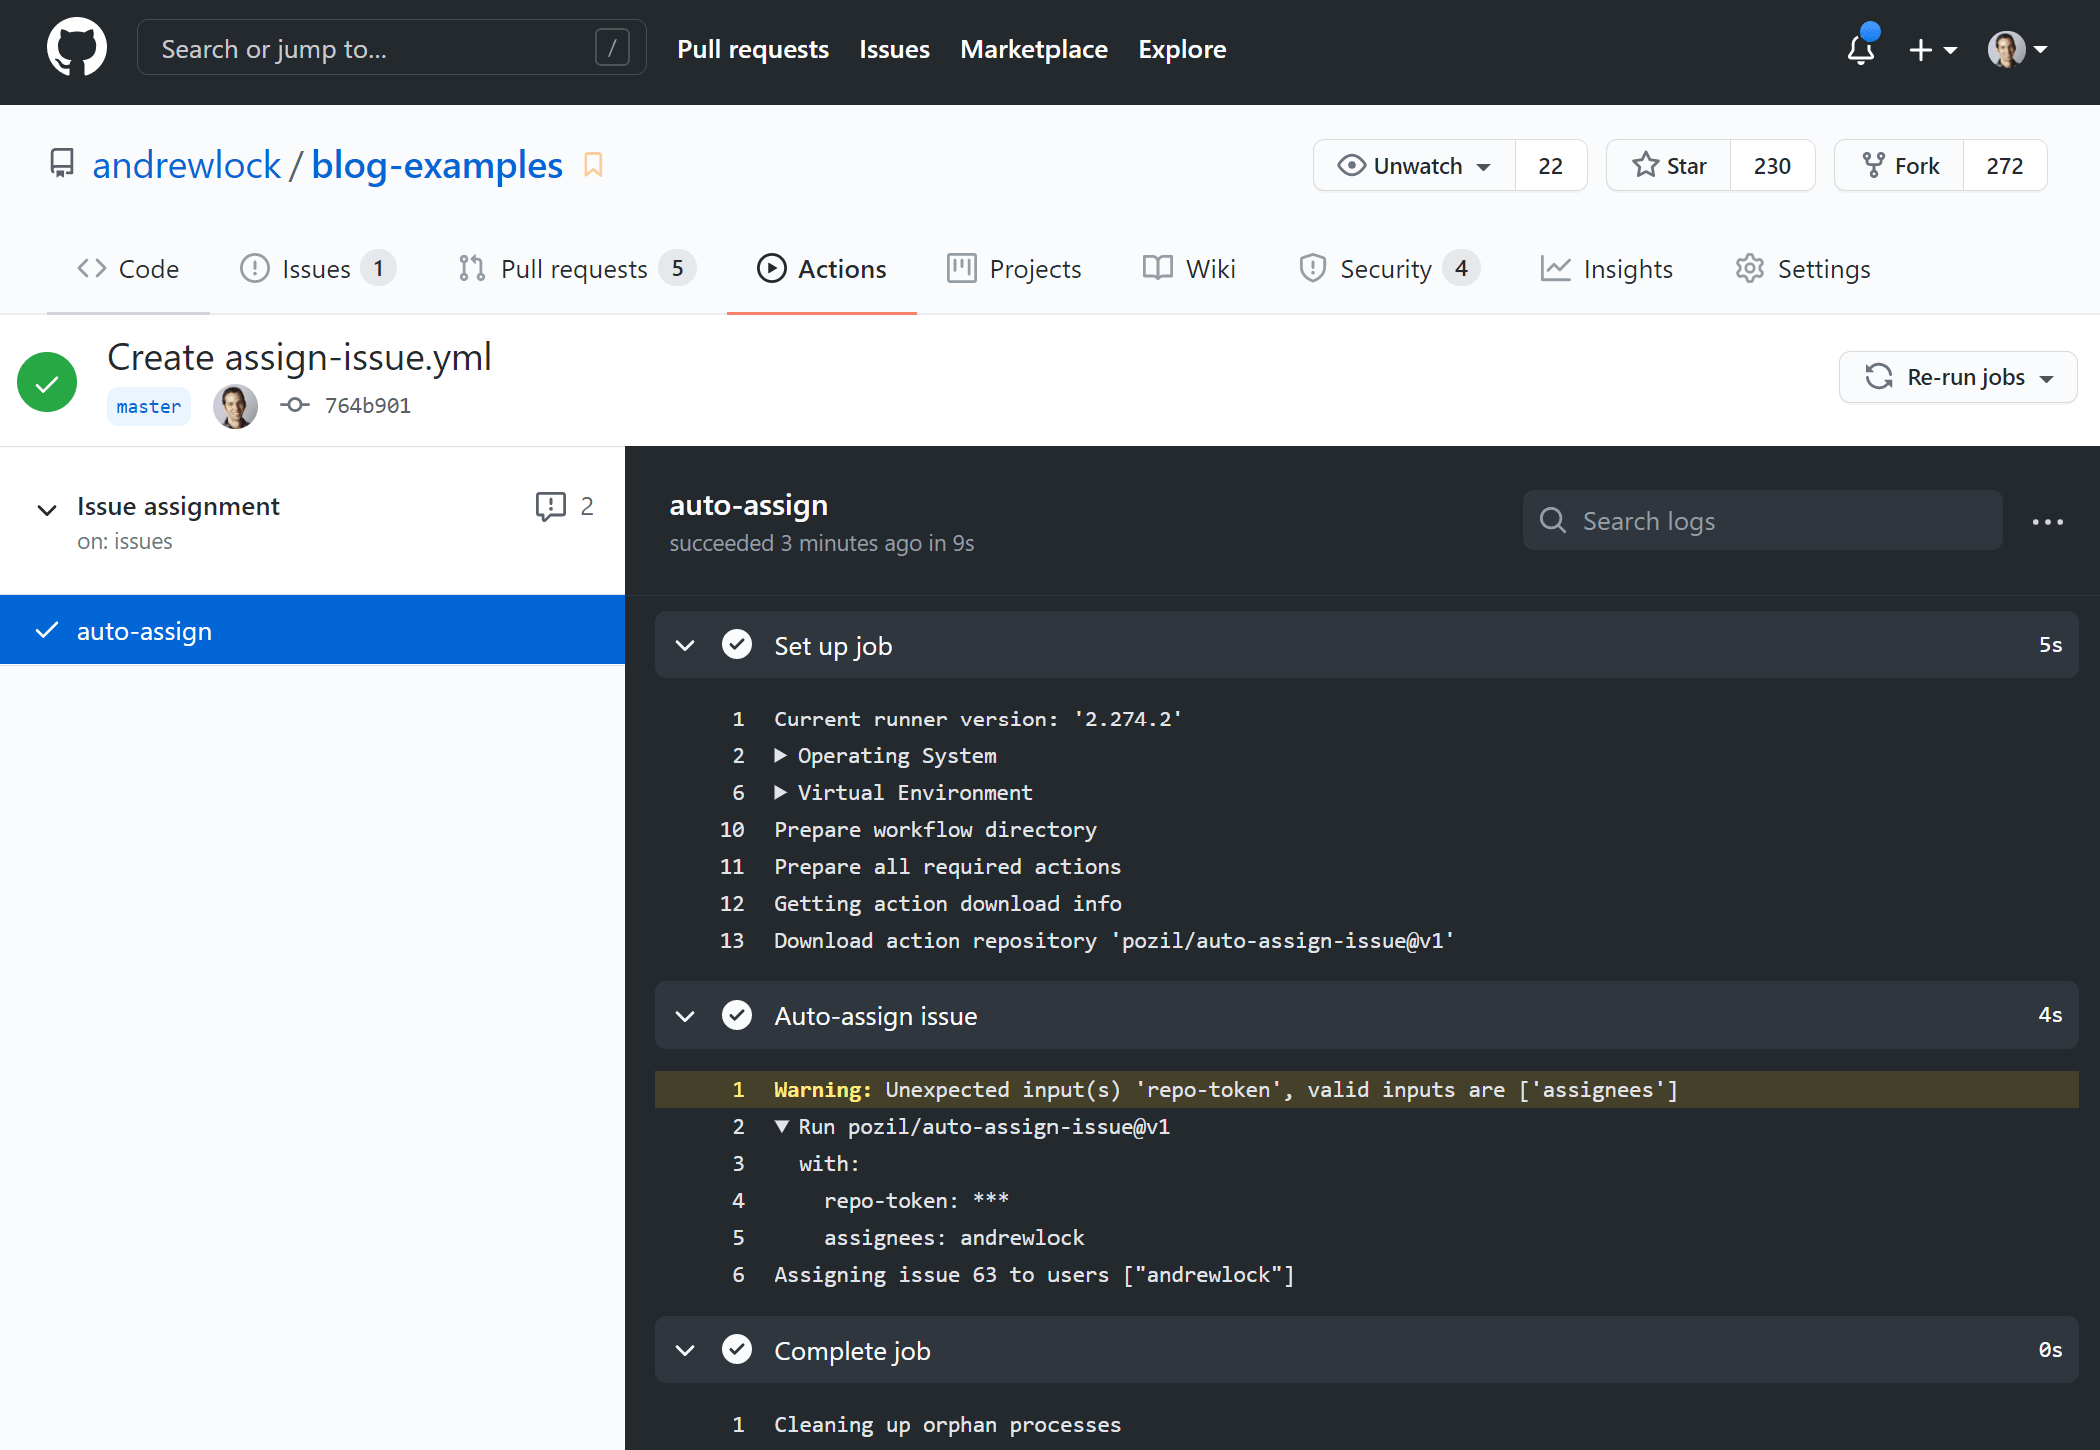 Viewing the logs of the completed workflow